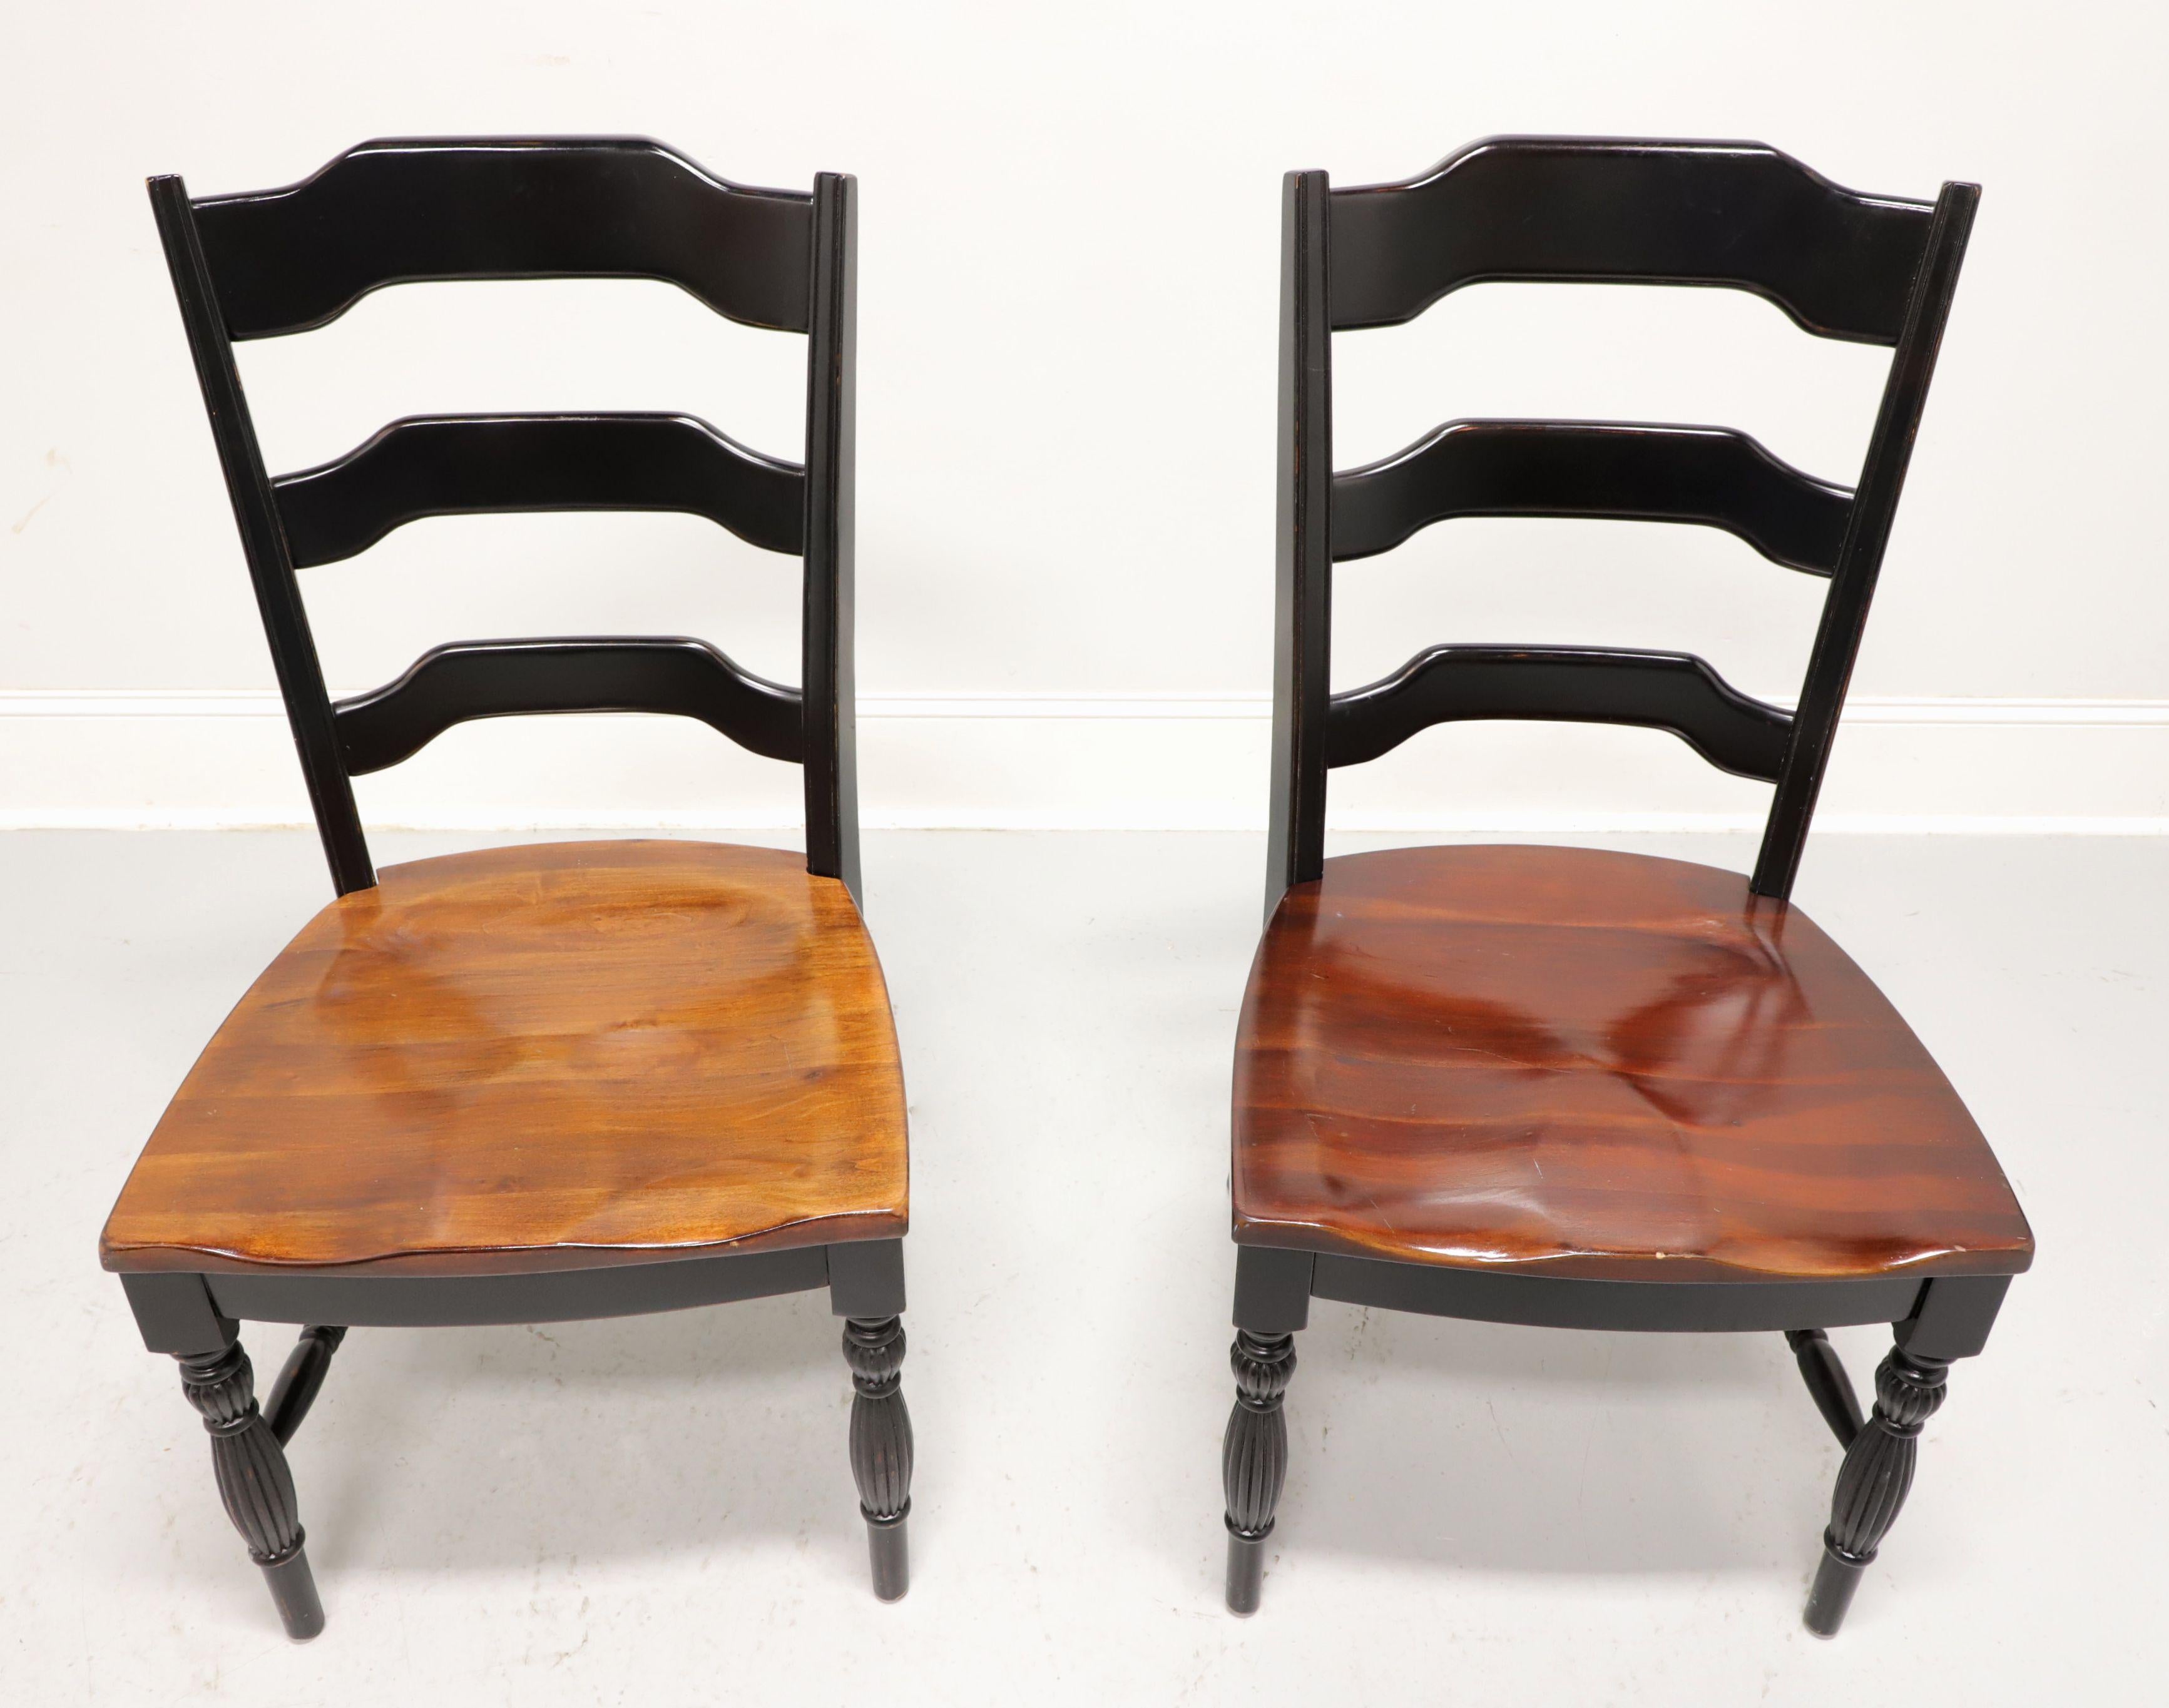 A pair of Cottage / Farmhouse style dining side chairs, unbranded. Hardwood with a distressed black painted finish, carved ladder backs, natural cherry saddle seats, turned & fluted legs and turned stretchers. Made in the Asia, in the late 20th